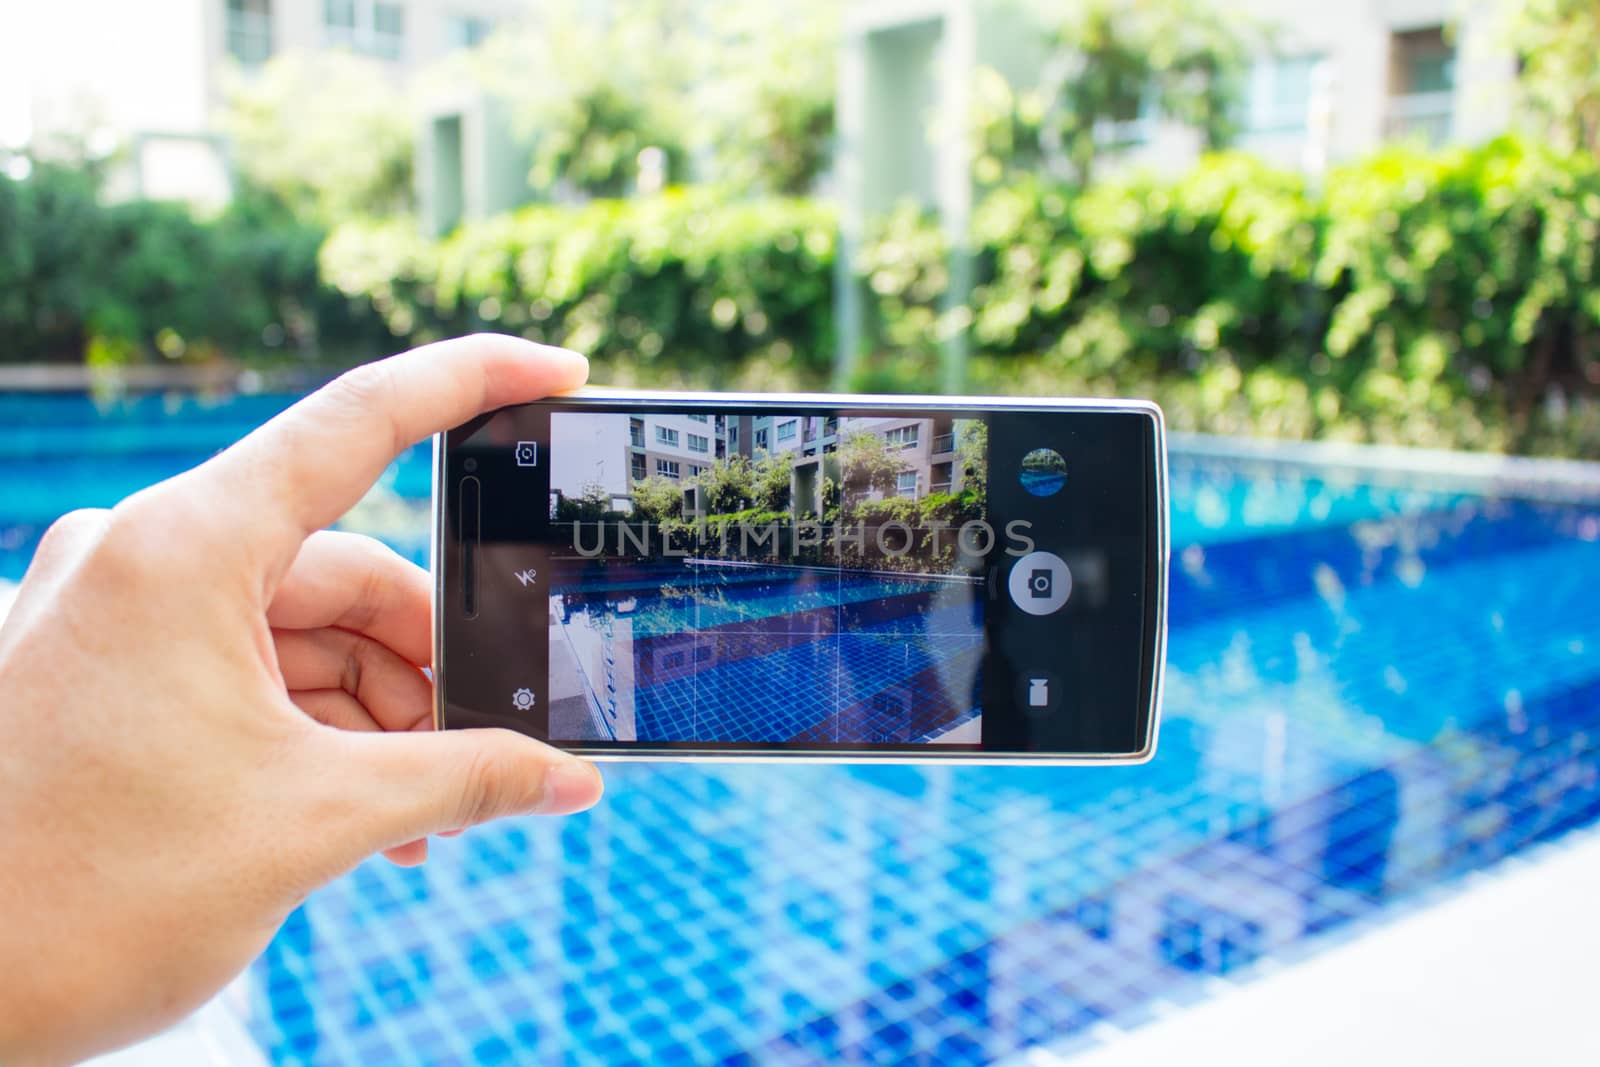 photo shooting on smartphone at swimming pool by oodfon